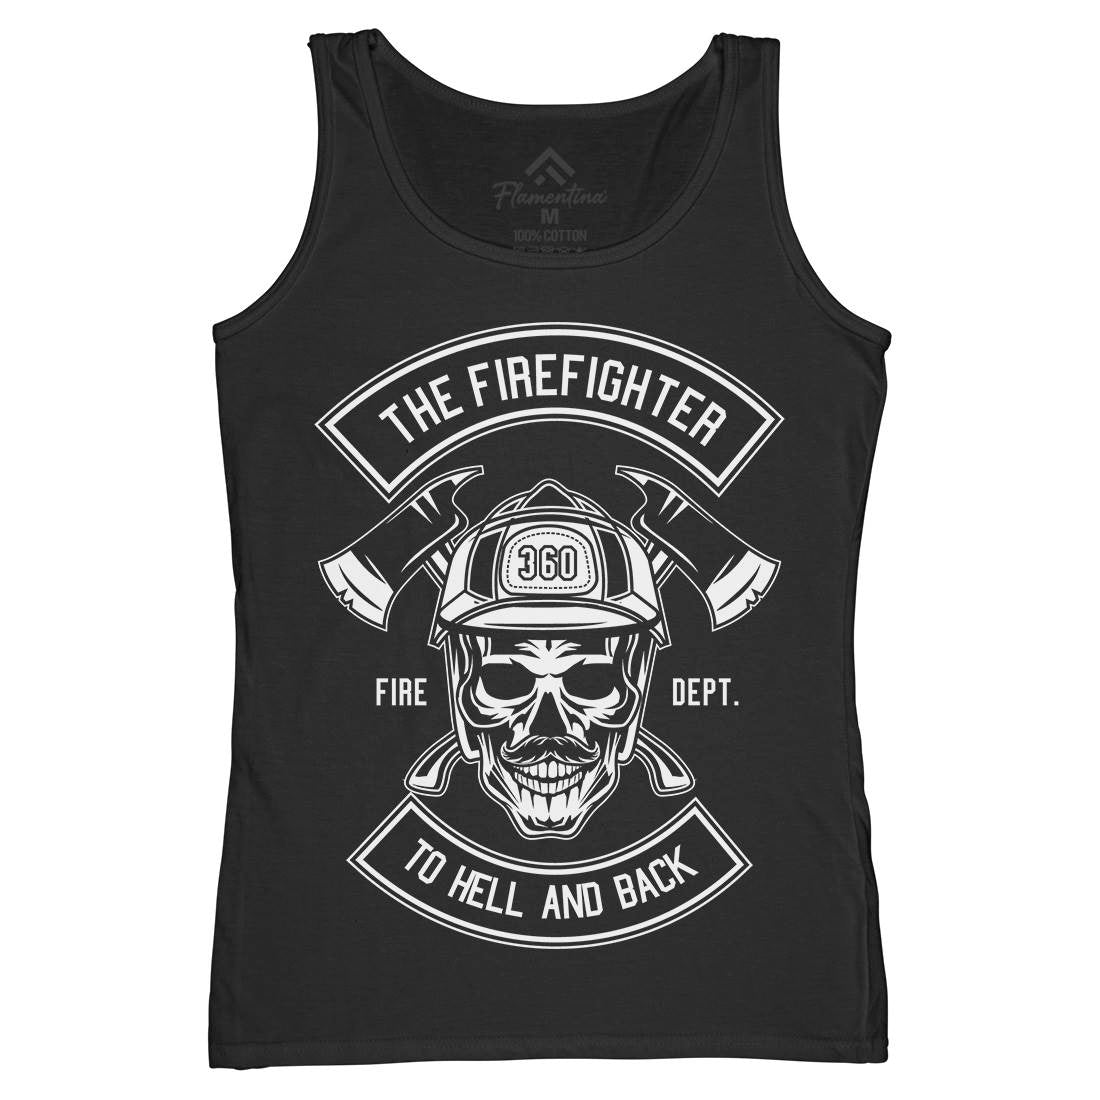 The Fire Fighter Womens Organic Tank Top Vest Firefighters B651